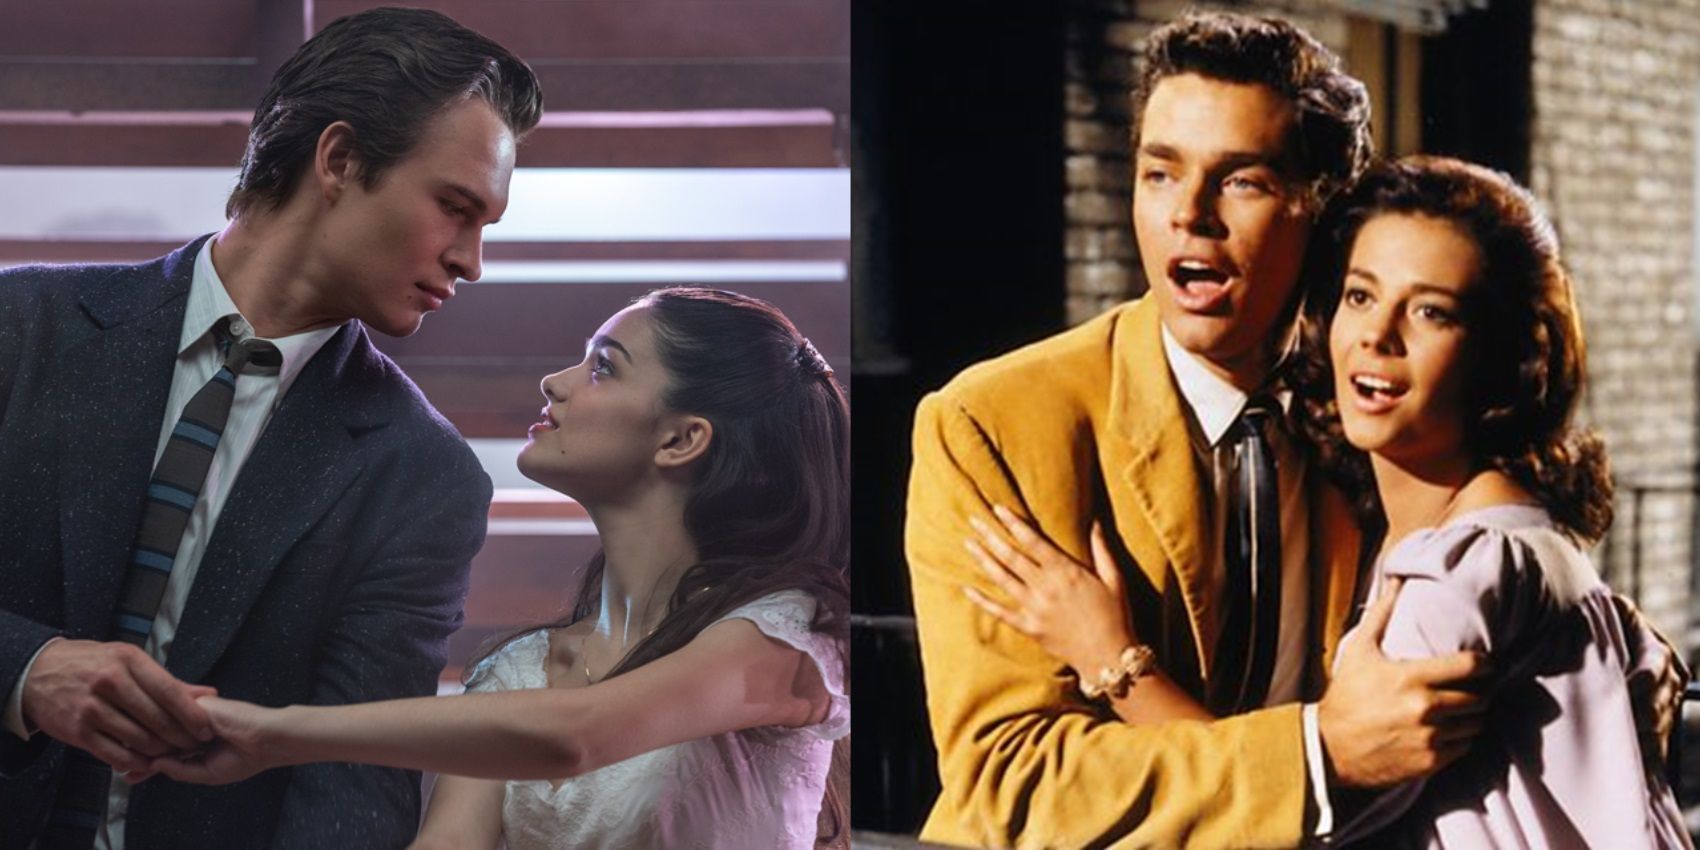 Both versions of West Side Story in a Featured Image